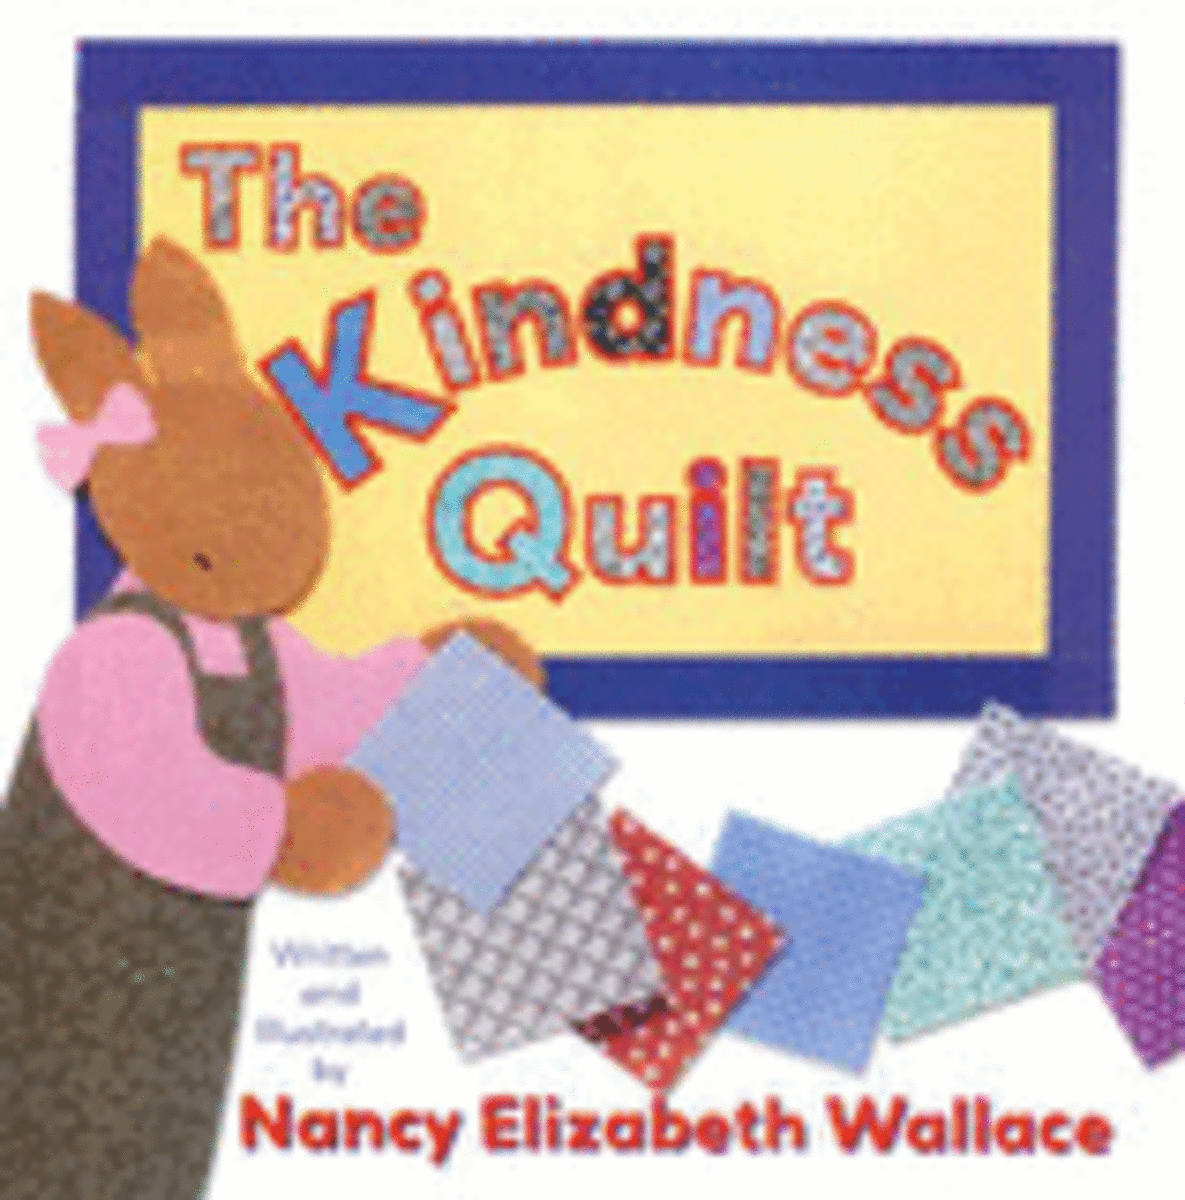 The Kindness Quilt by Nancy Elizabeth Wallace book cover